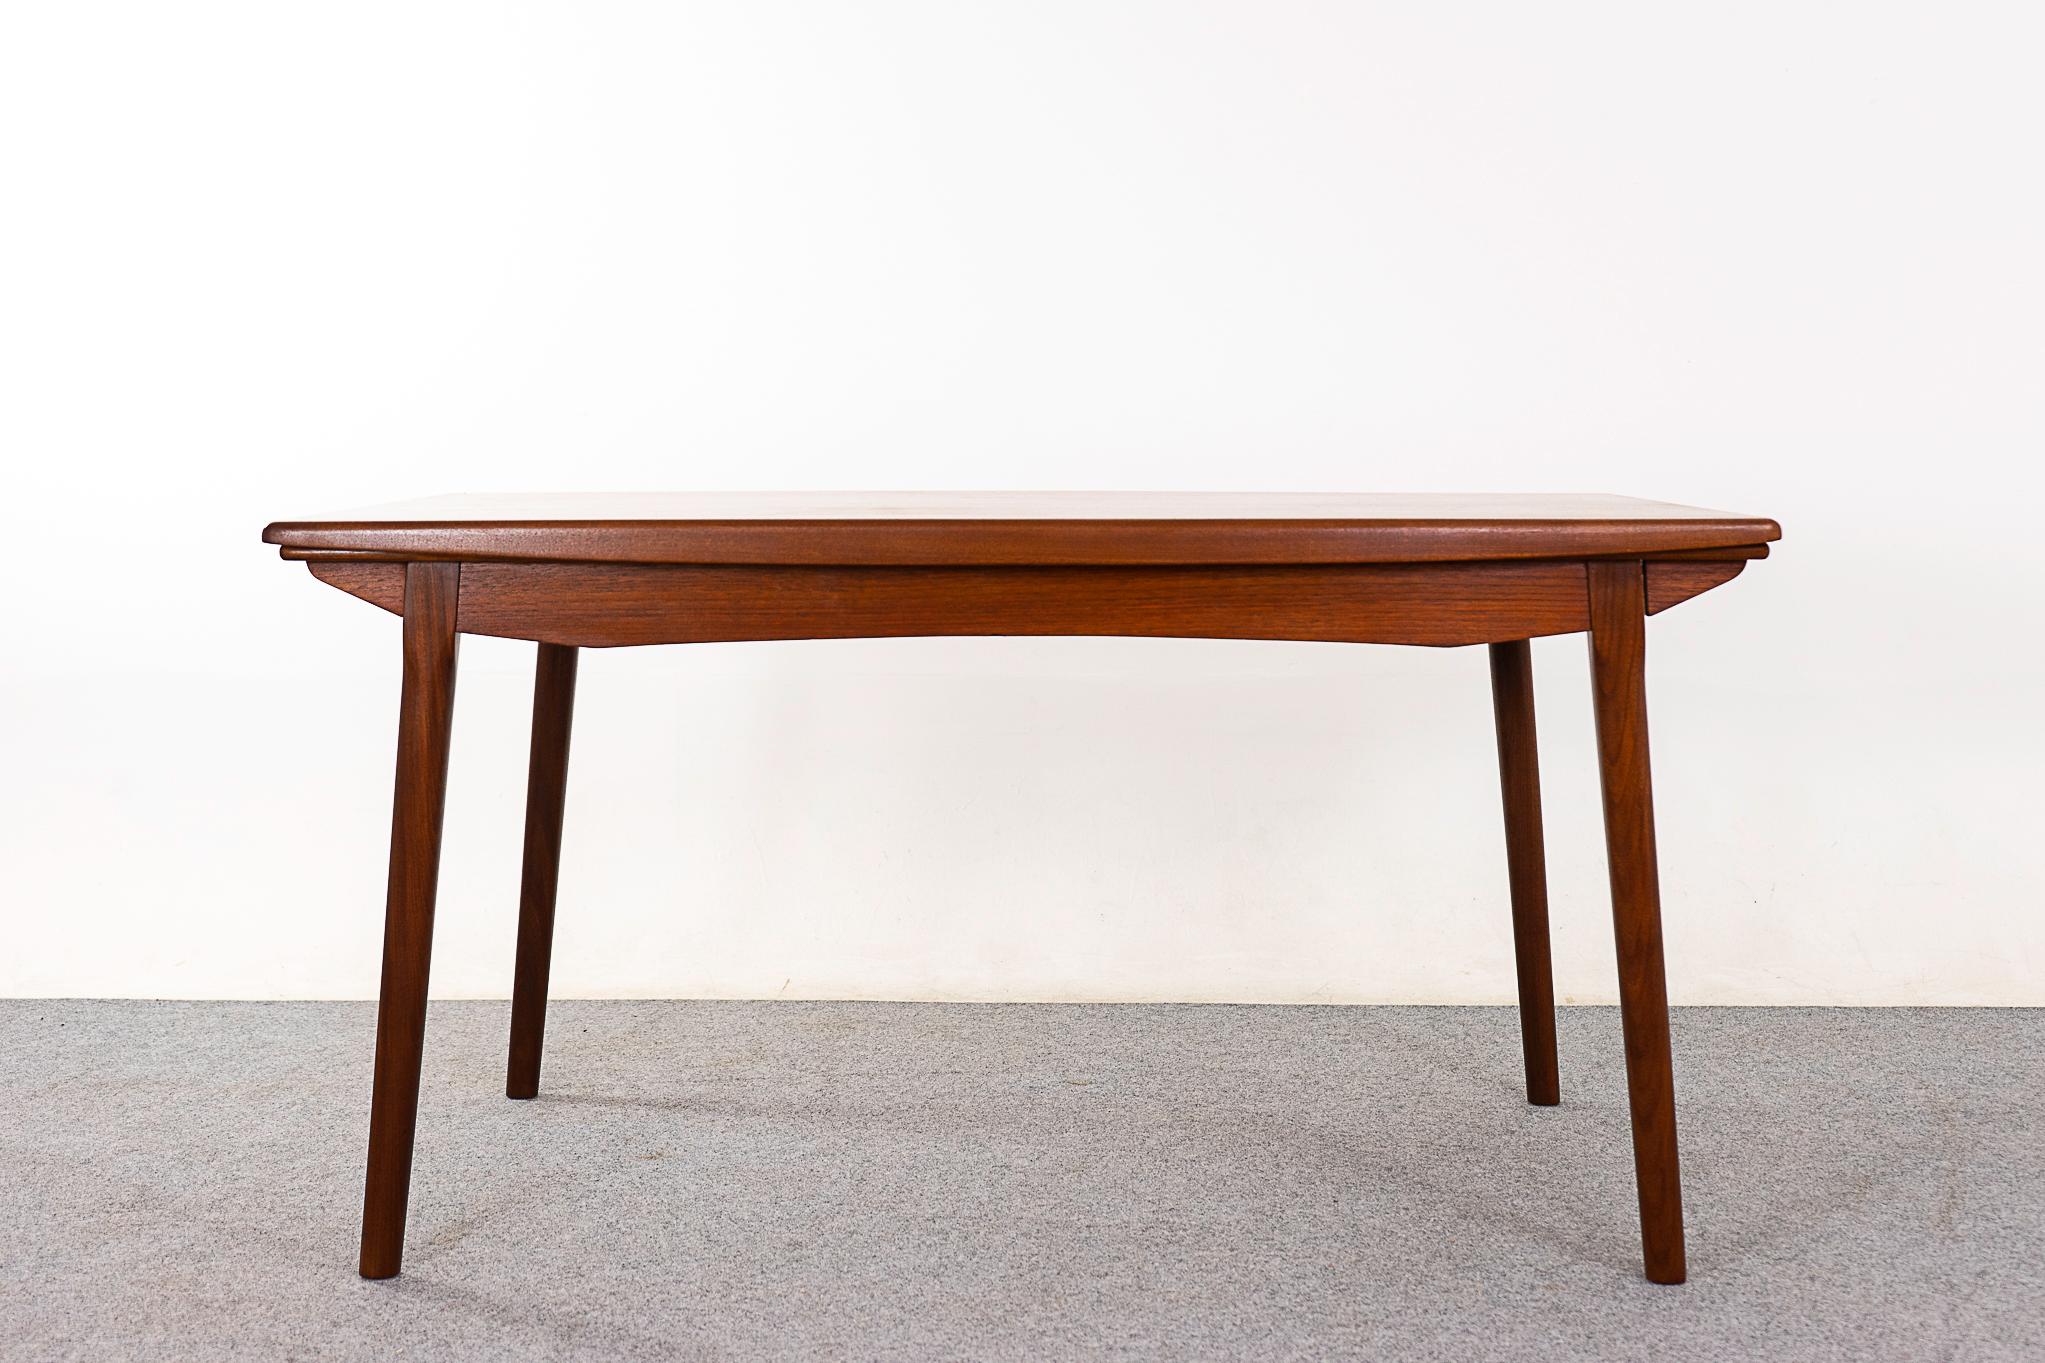 Teak mid-century dining table, circa 1960's. Splayed legs and unique arching apron. Top is framed with solid wood edging, veneered top with book-matched grain. Self-storing leaves slide out from each end to extend the table surface by nearly two